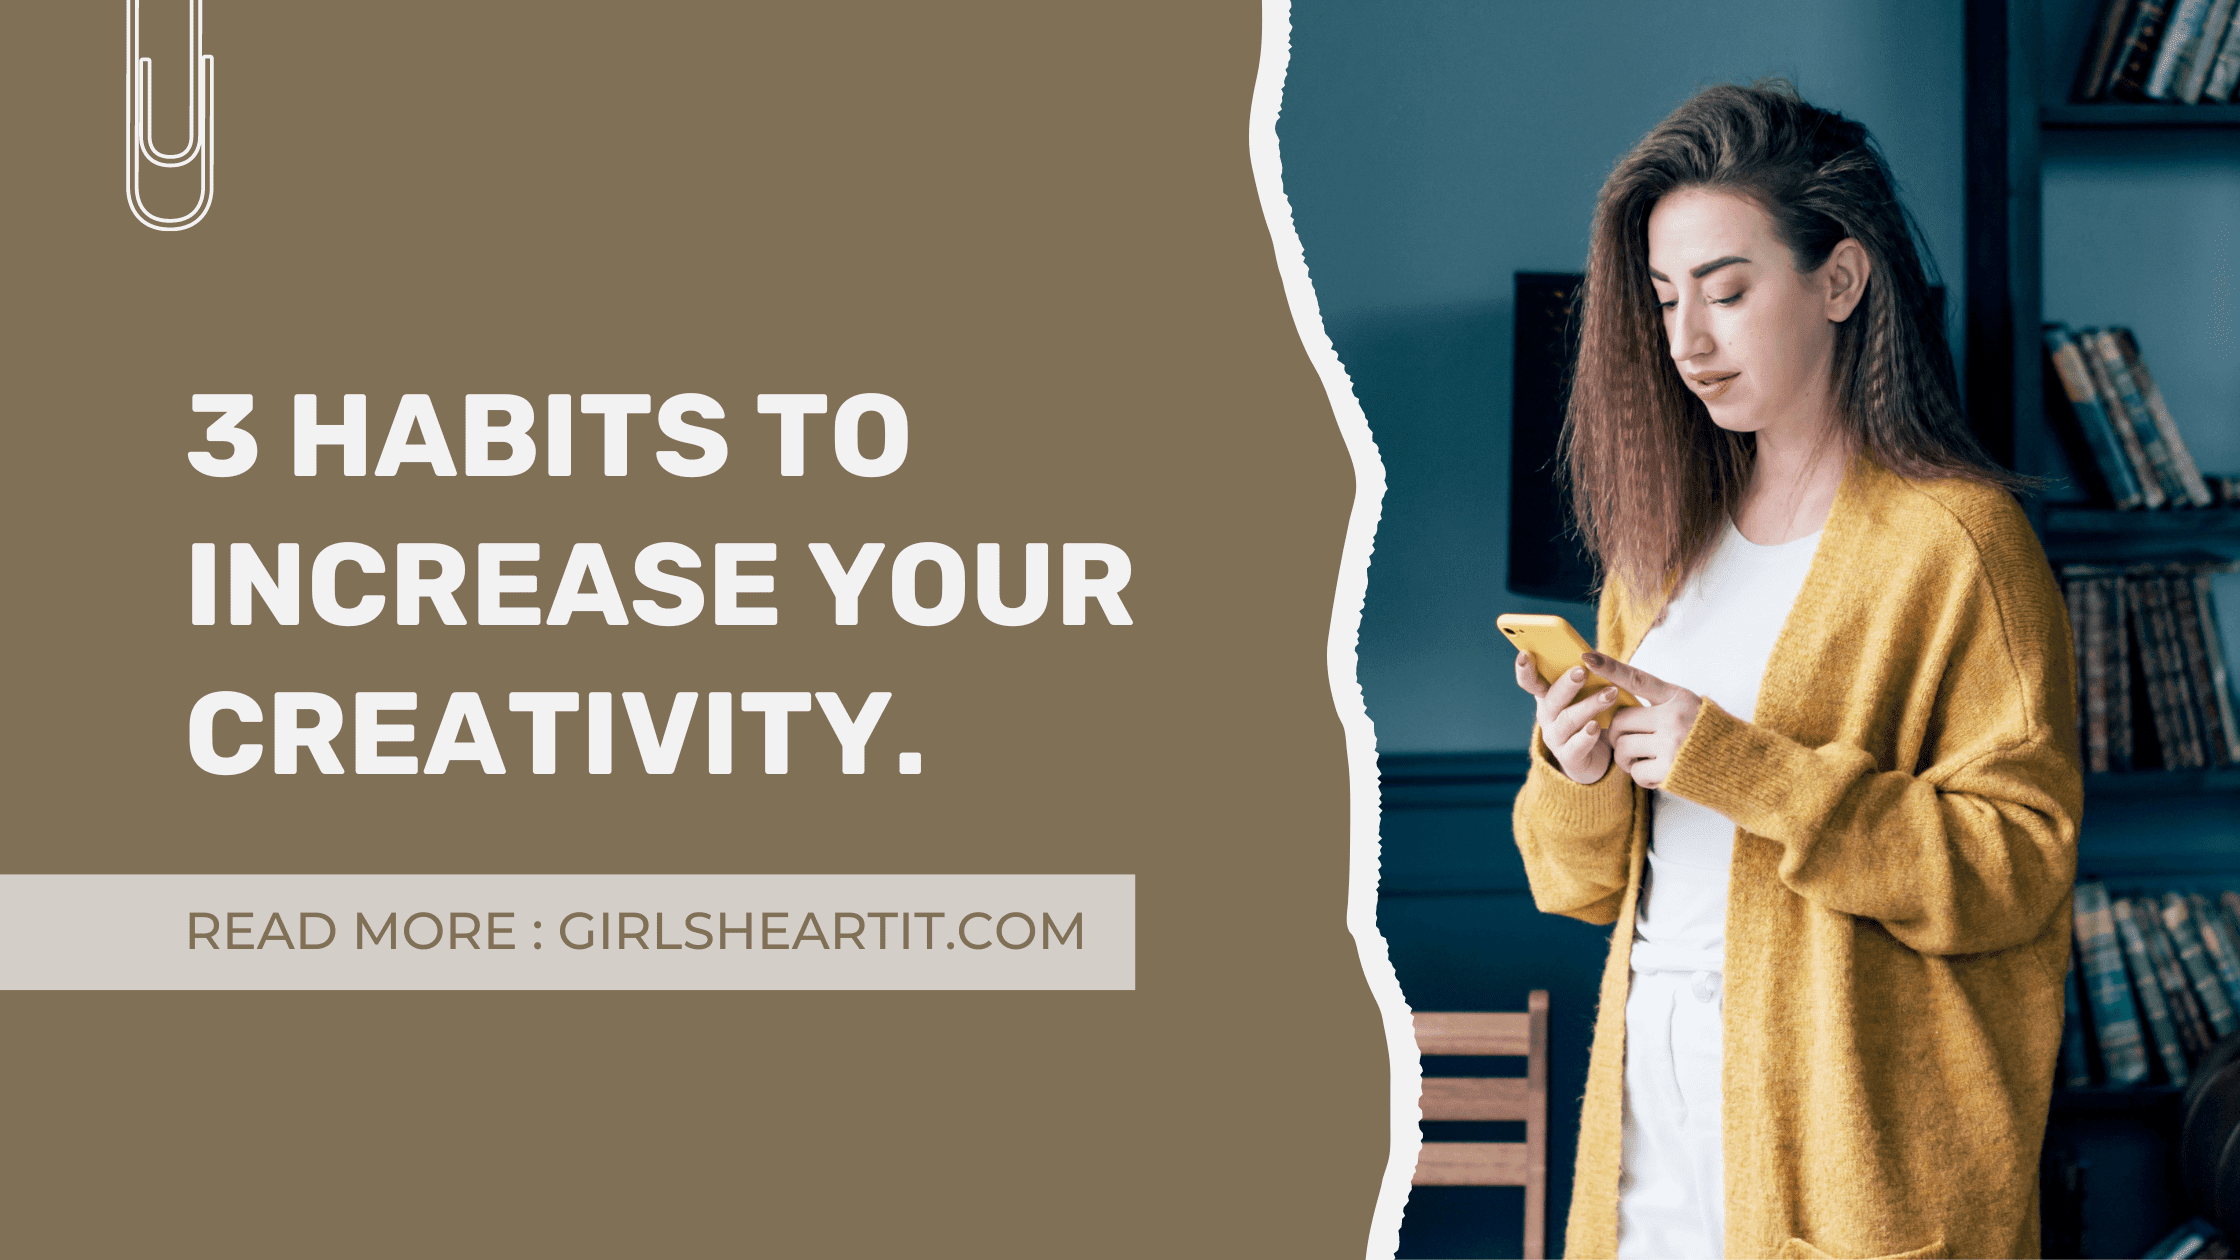 3 Habits to Increase Your Creativity